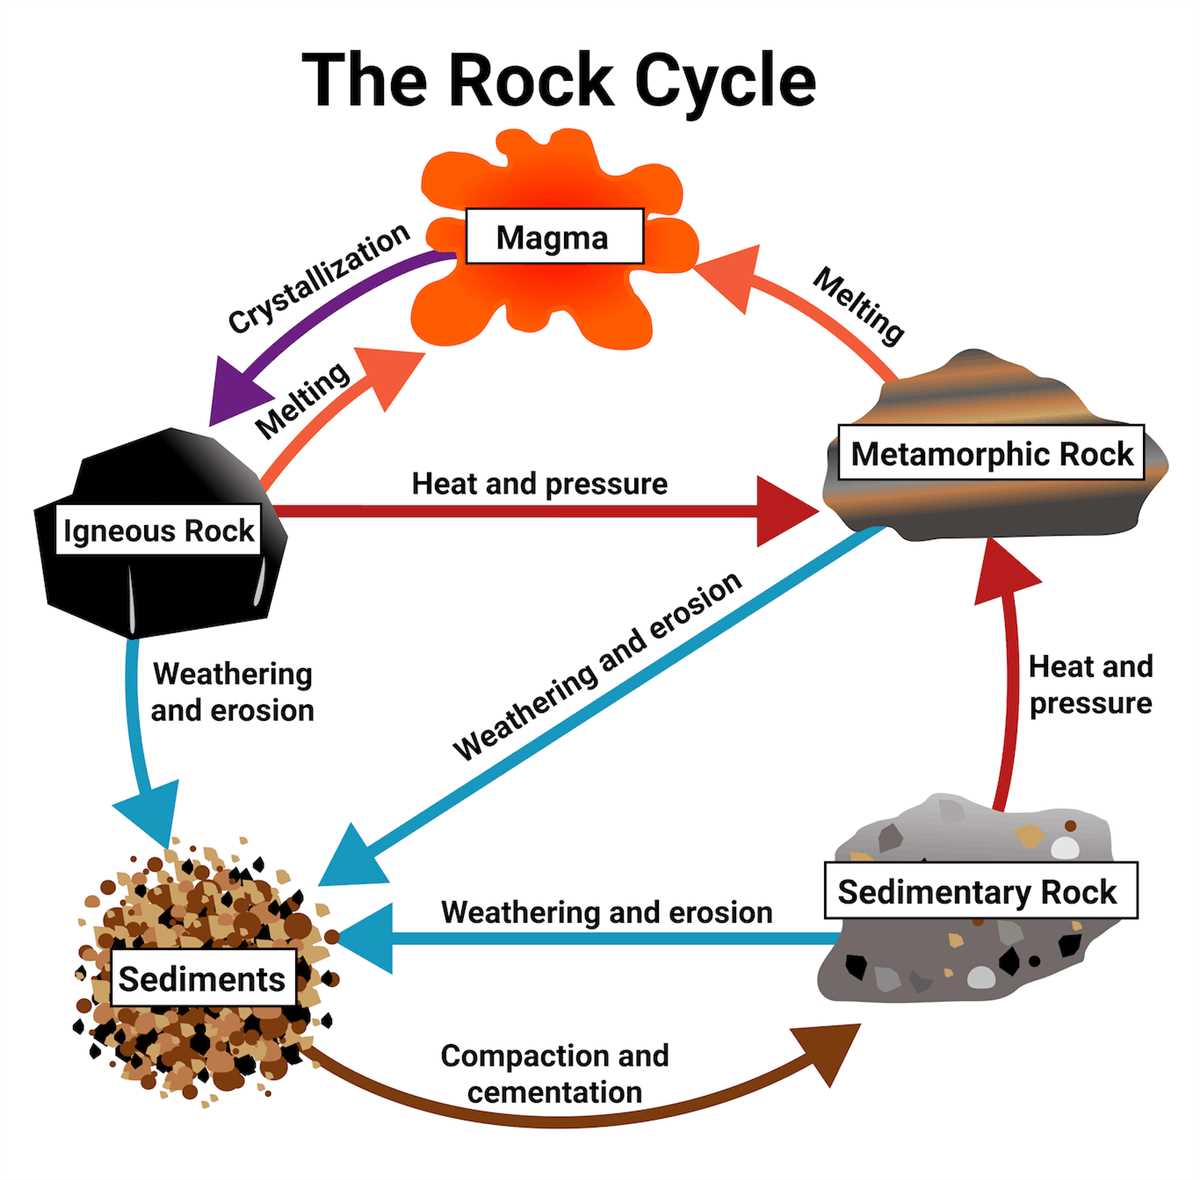 Metamorphic Rocks: How They are Formed